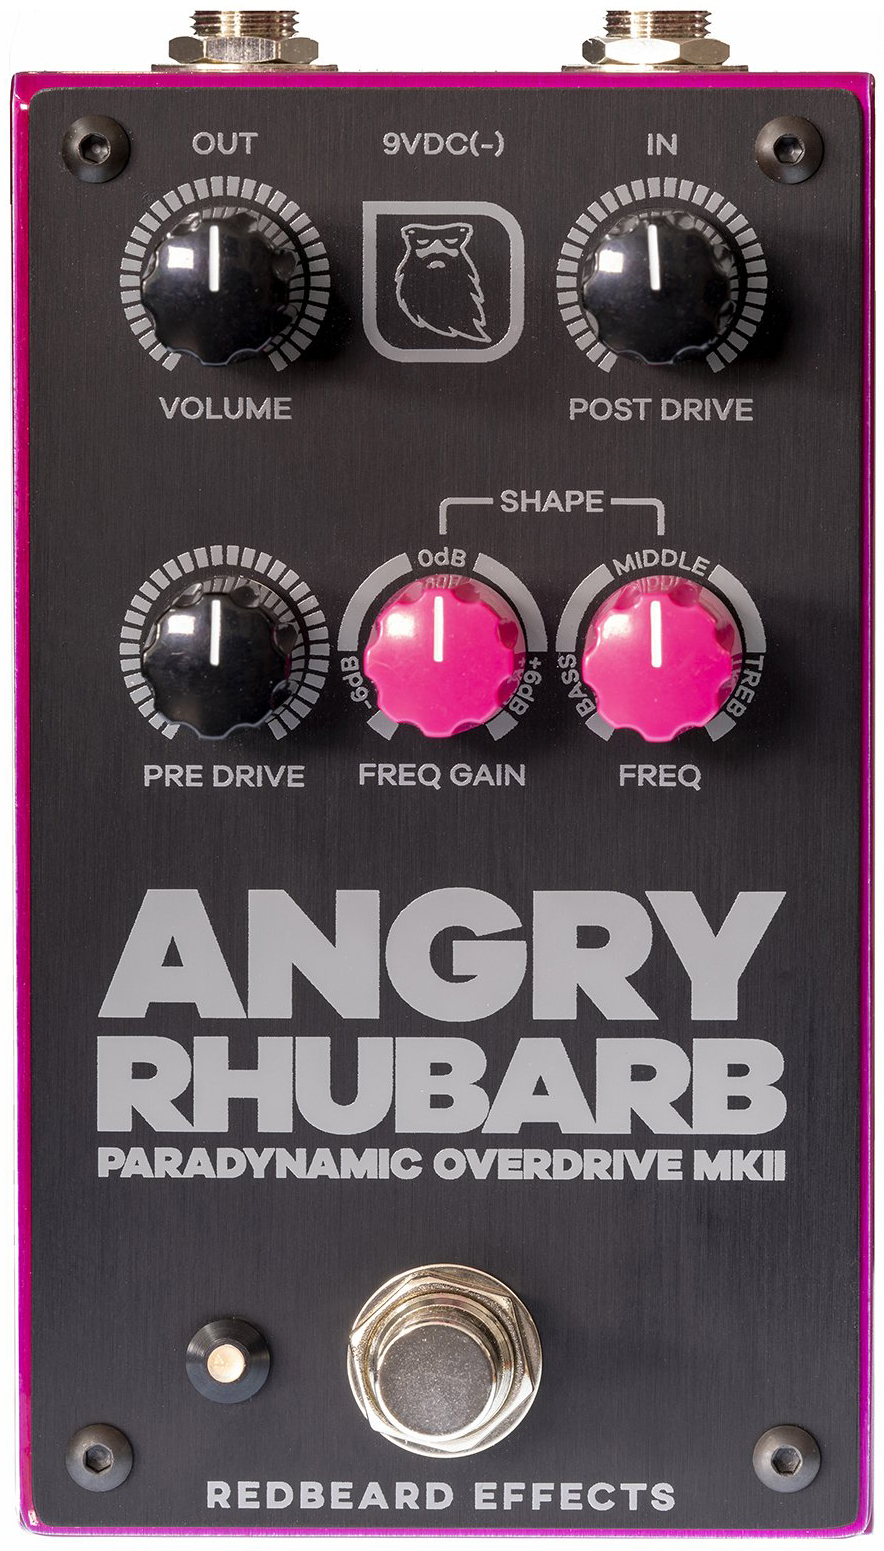 Redbeard Effects Angry Rhubarb Paradynamic Overdrive Mkii - Pedal overdrive / distorsión / fuzz - Main picture